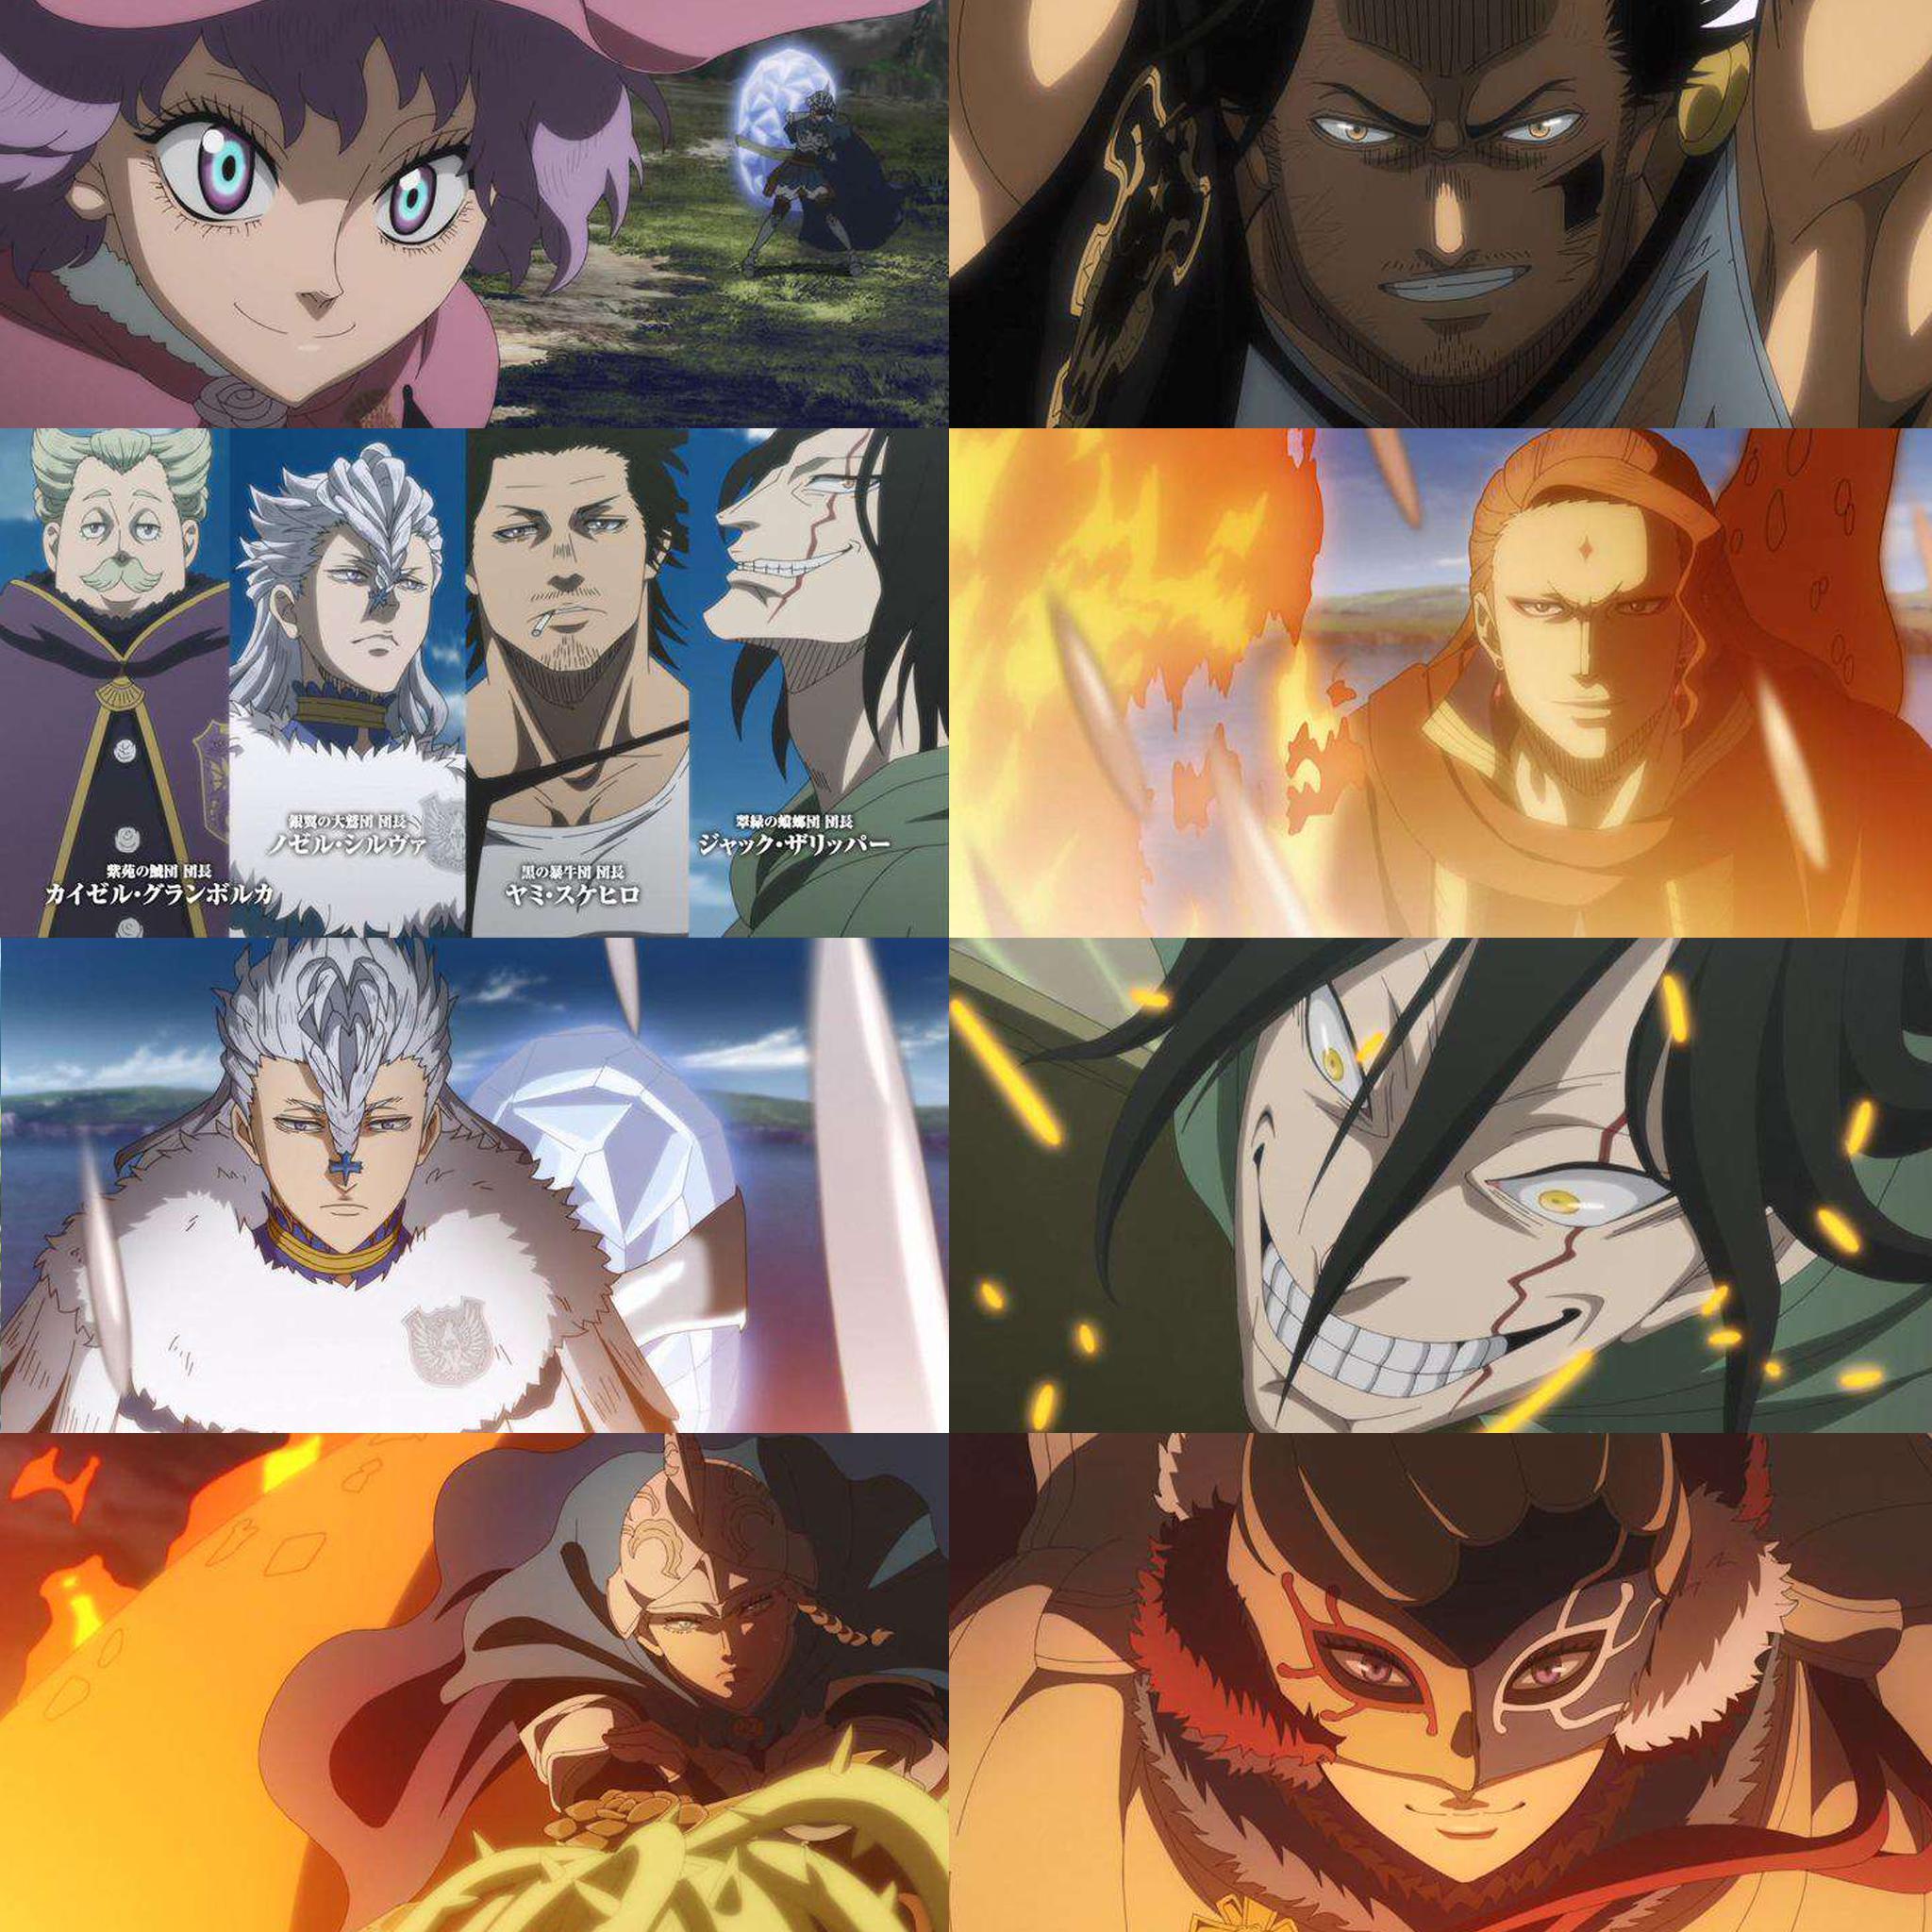 Black Clover Episode 151 Clash! The Battle of the Magic Knights Squad Captains! Preview Image